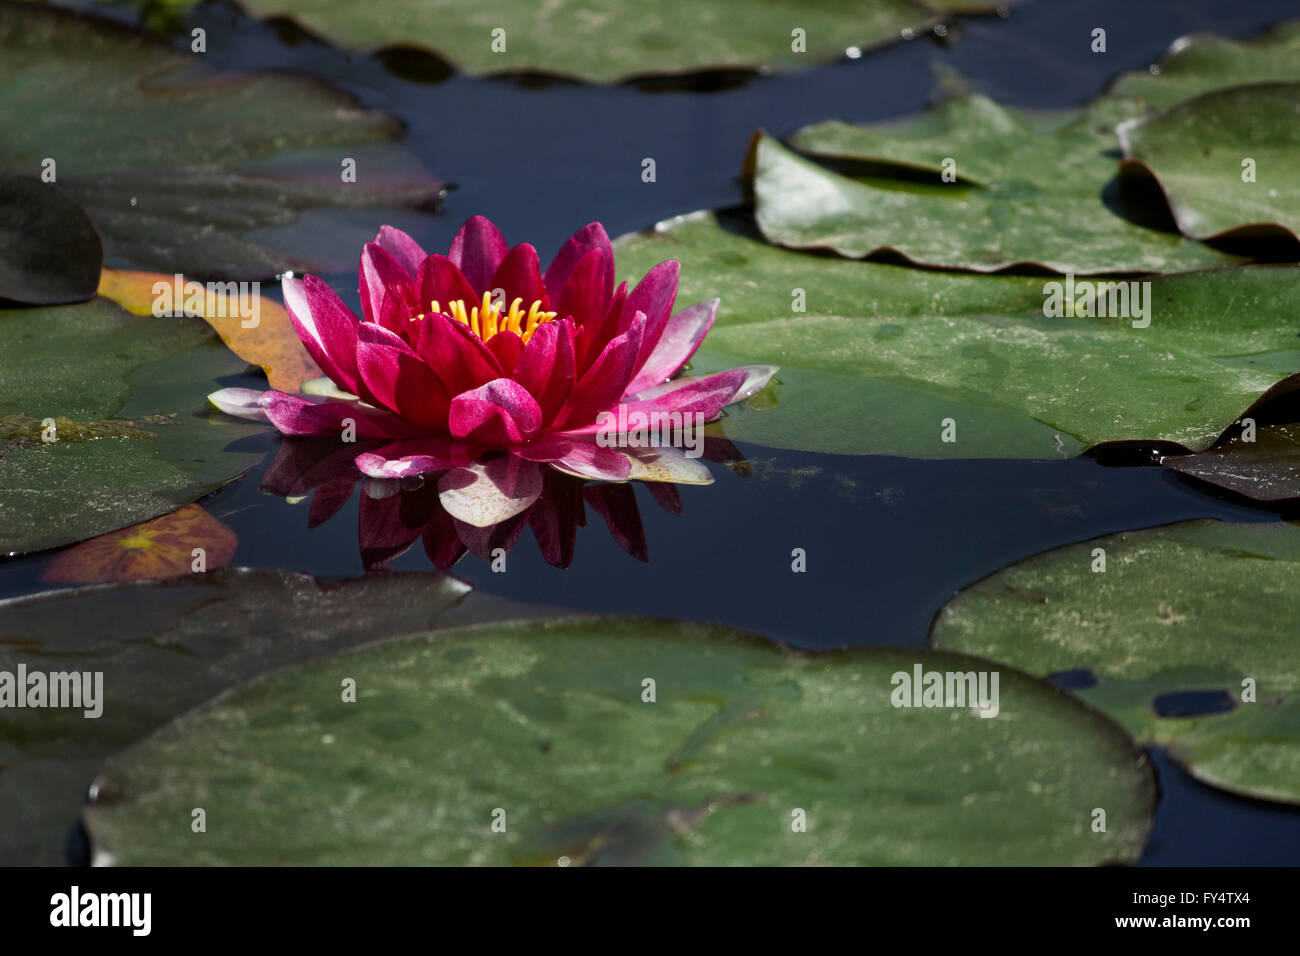 Close-up of a sacred violet-colored water lily (waterlily cultivar) hydrophilic herb blossom surrounded by floating lily pads. Stock Photo